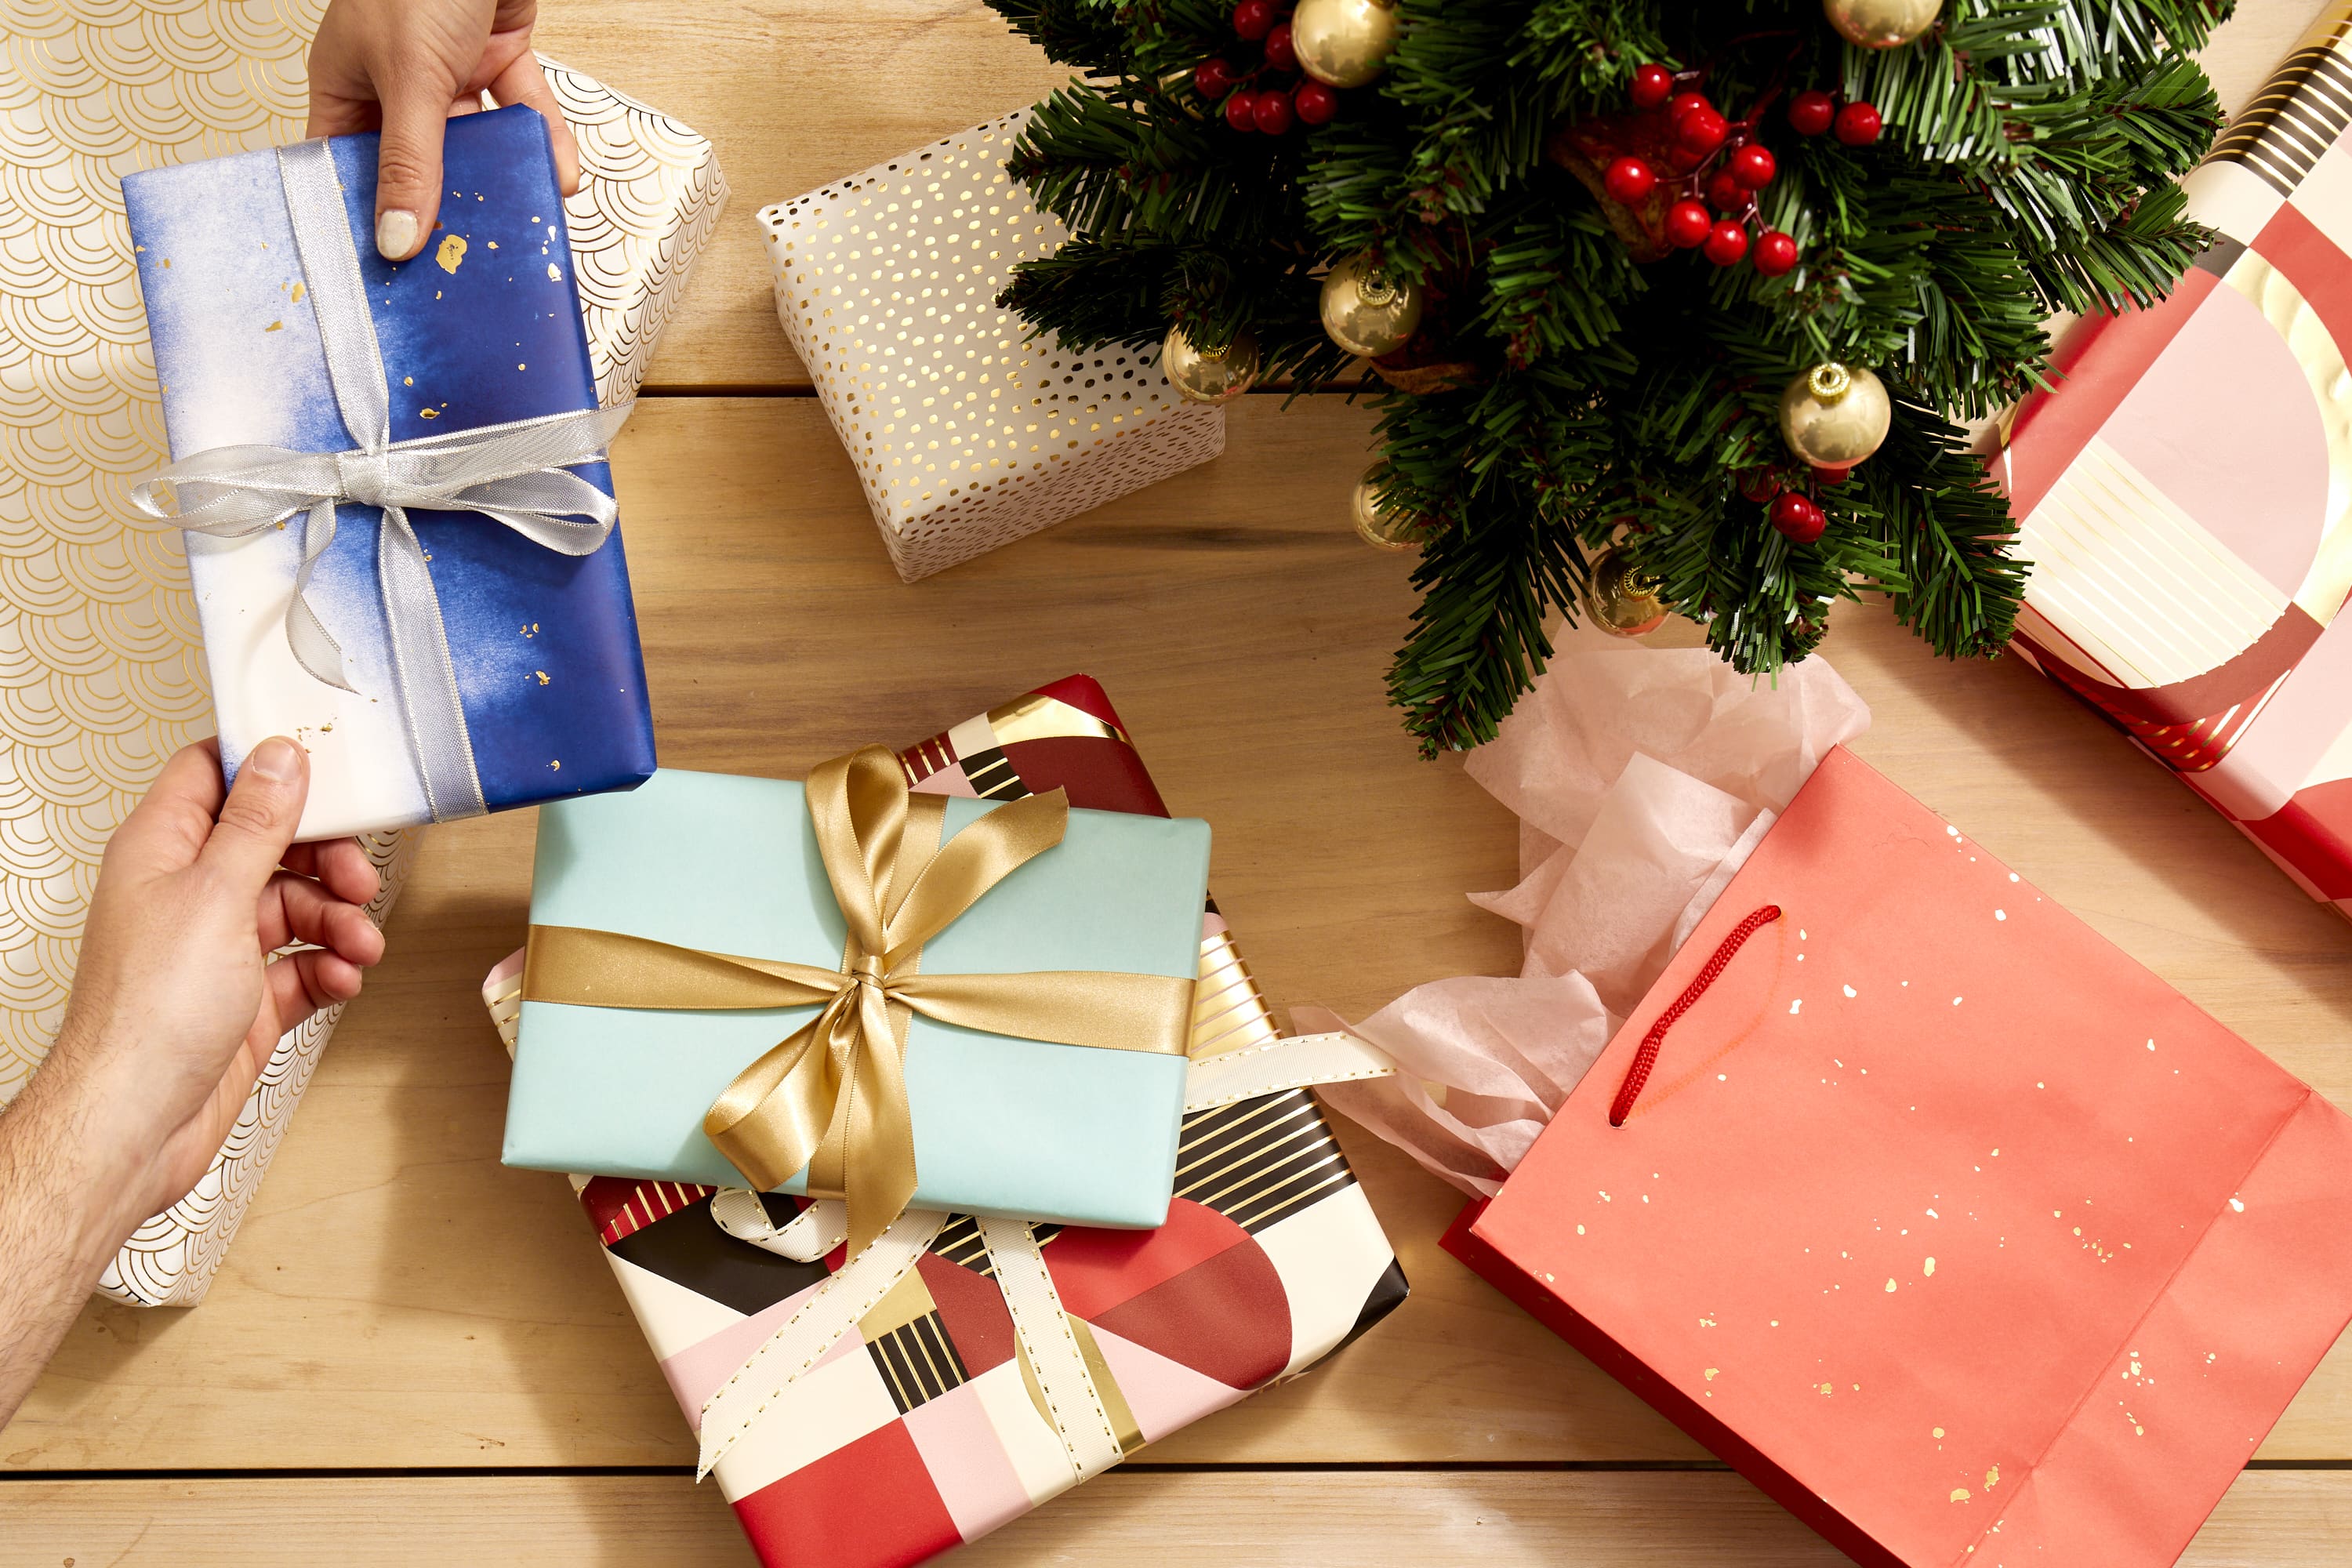 13 Gift Exchange Games to Make Swapping Presents More Fun